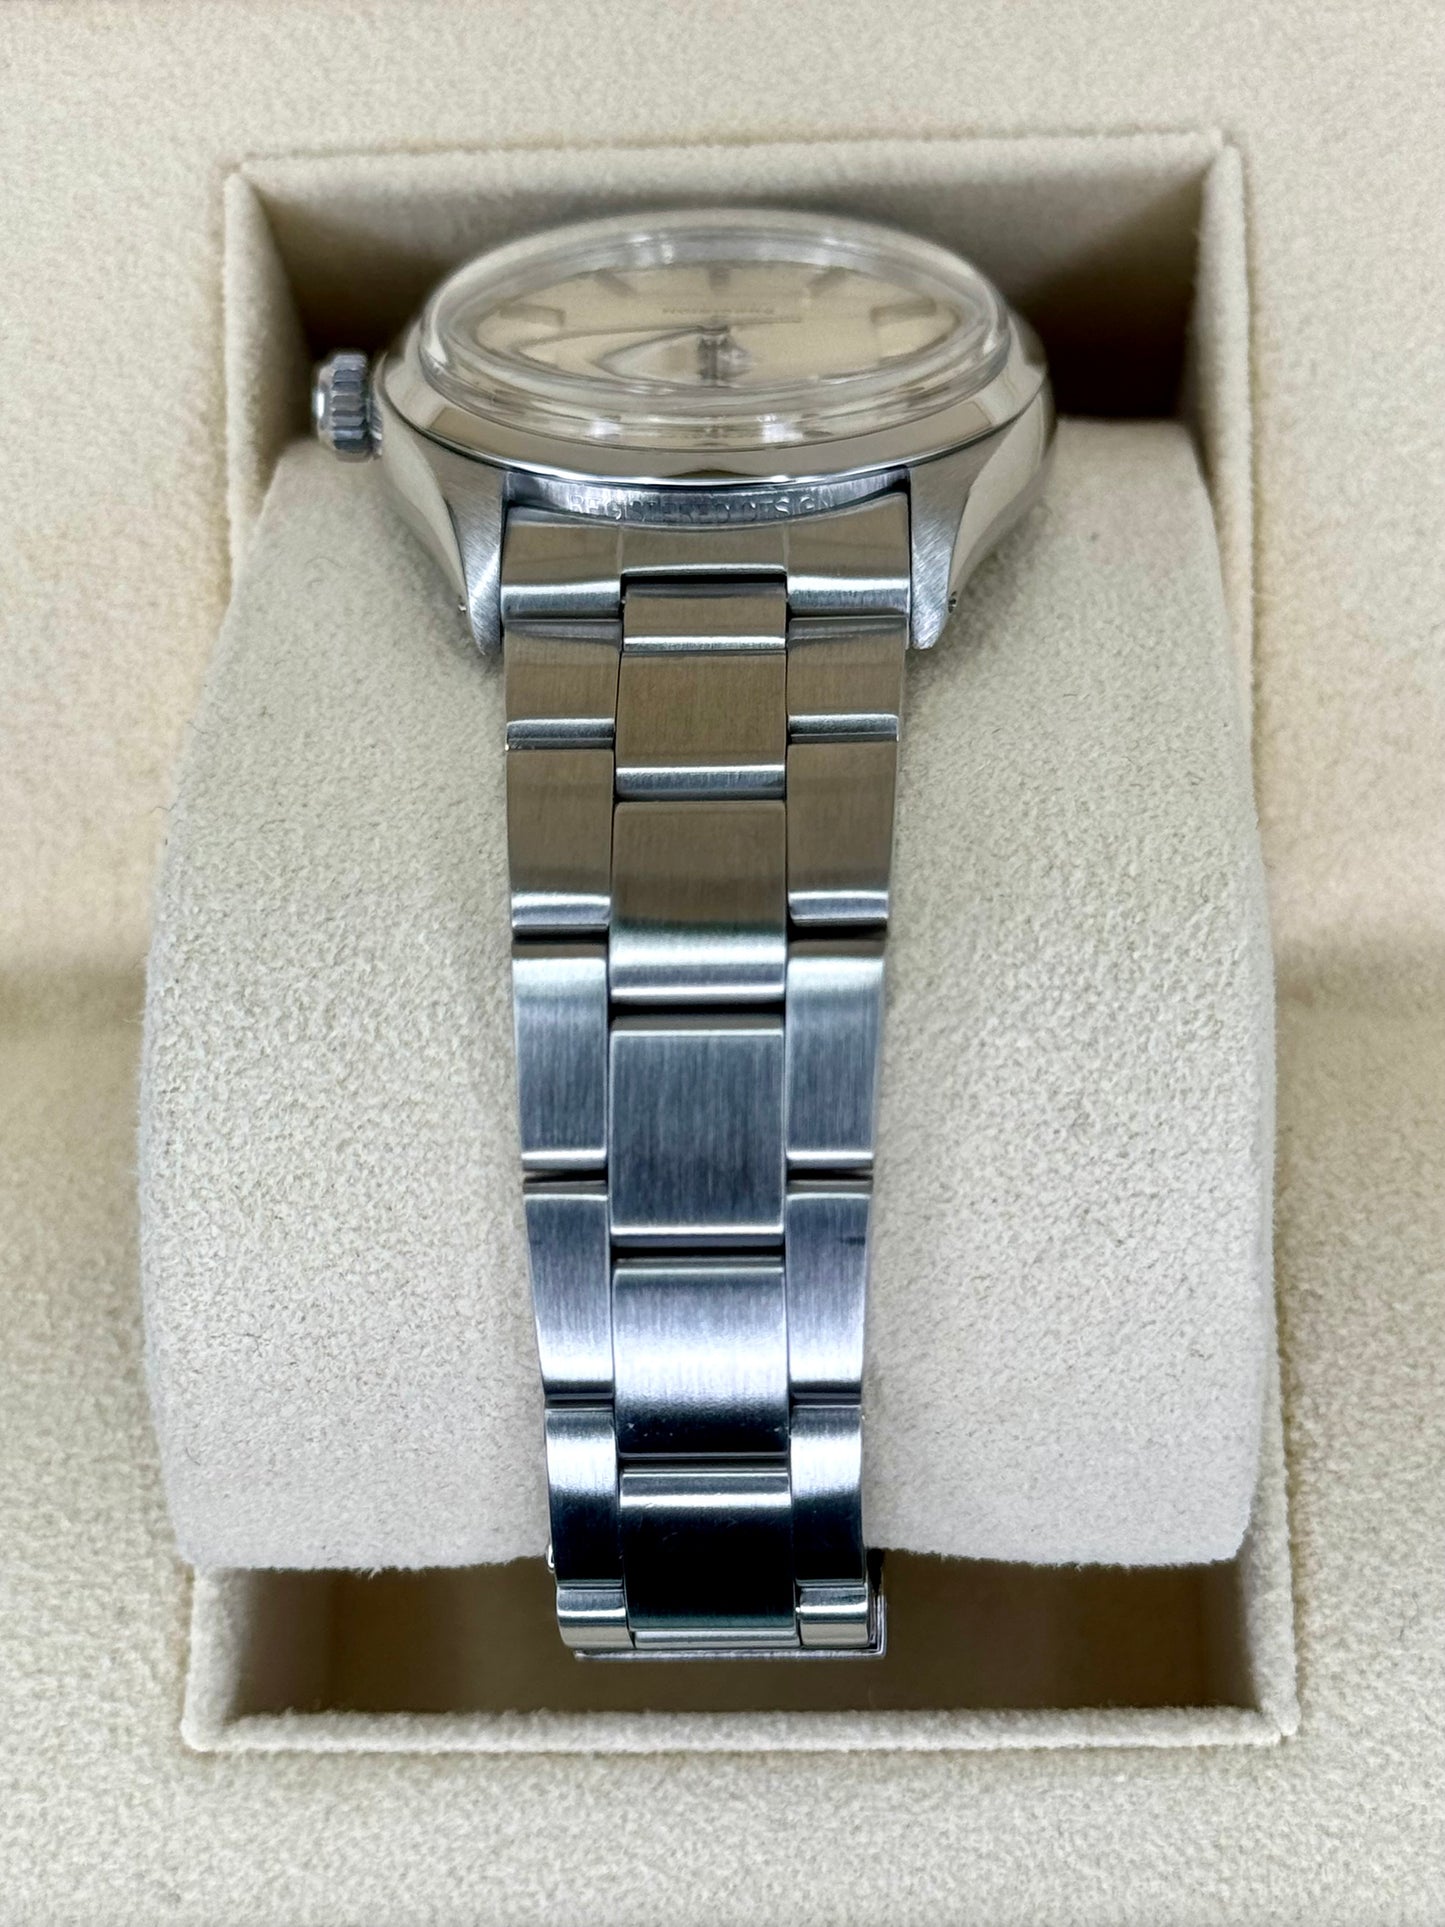 1978 Rolex Air-King 34mm 5500 Stainless Steel Oyster Silver Dial - MyWatchLLC